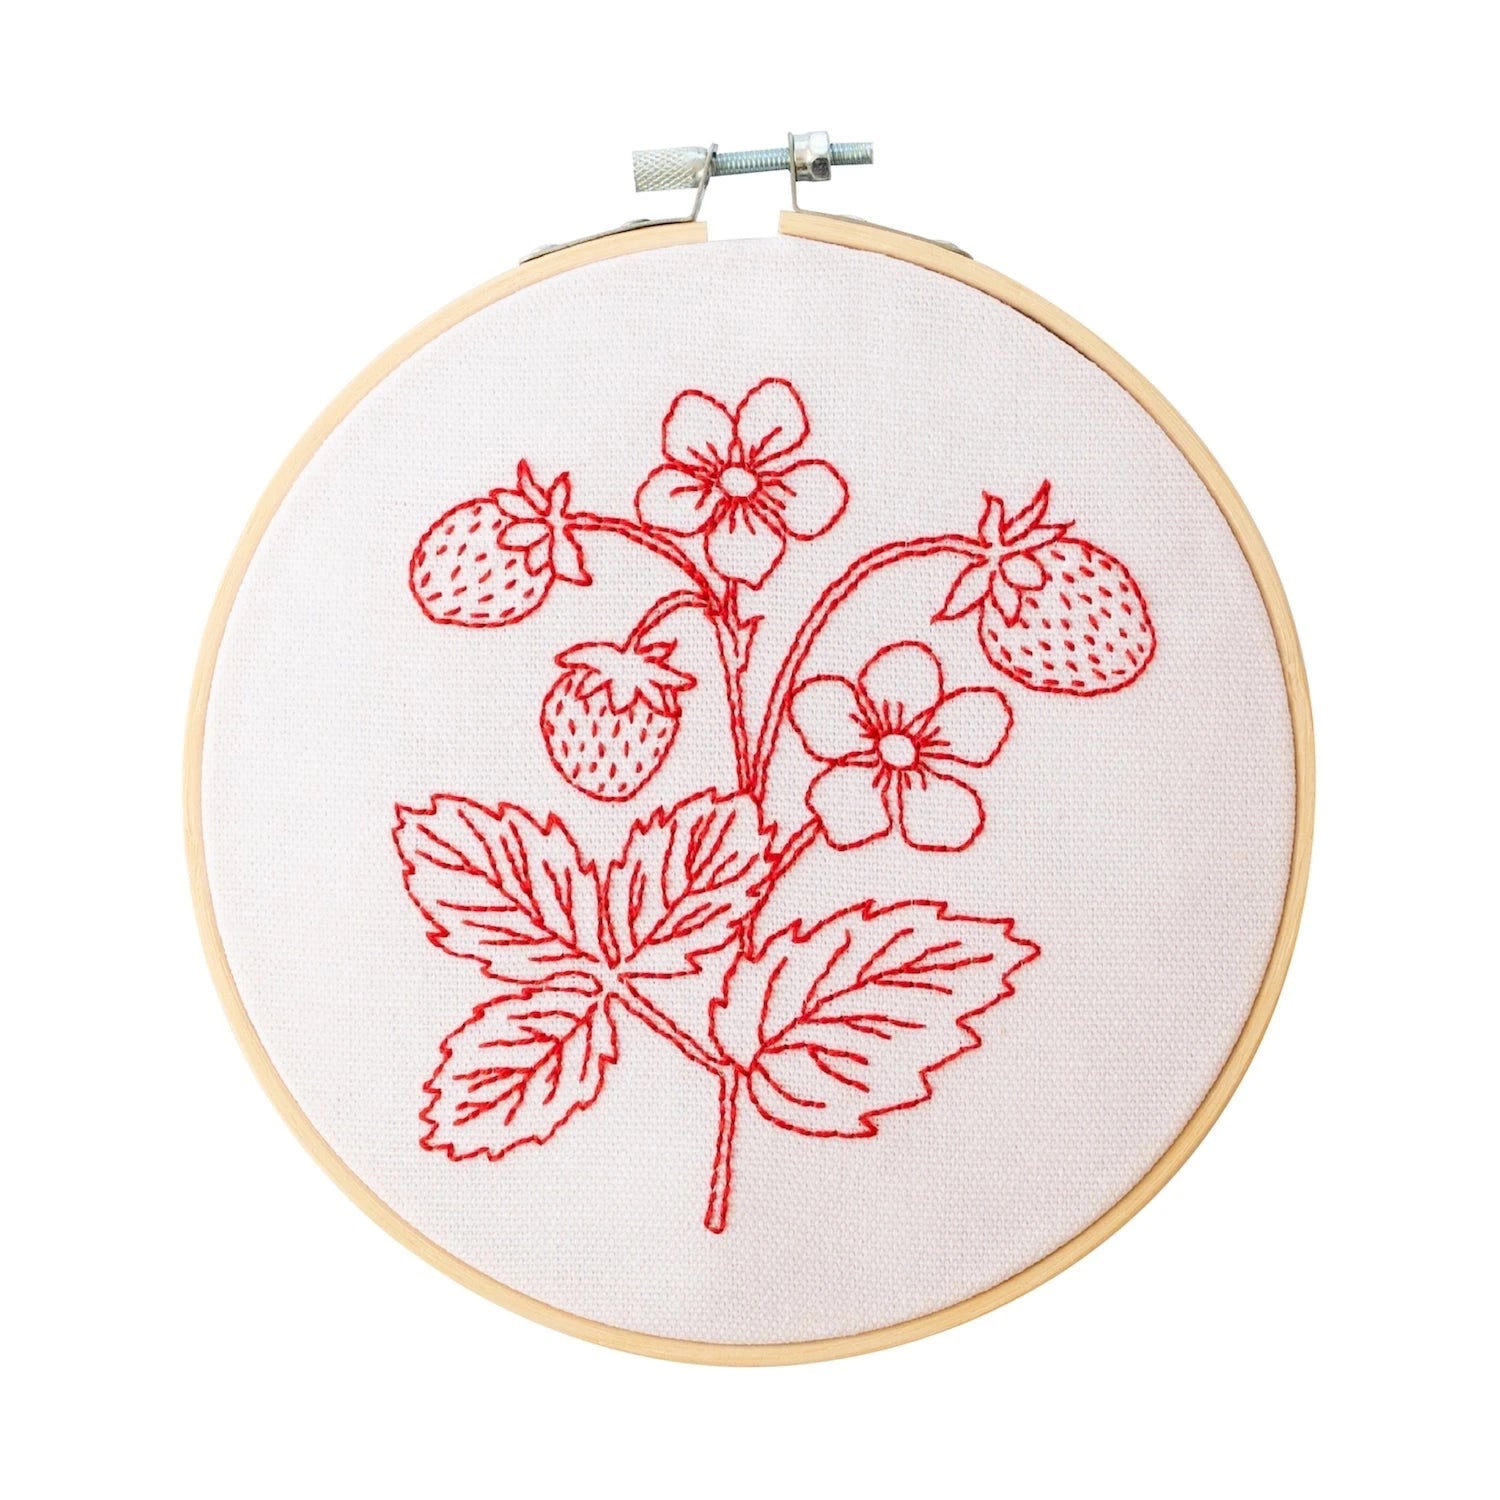 tan hoop with white cloth and red strawberries on stem embroidered on it